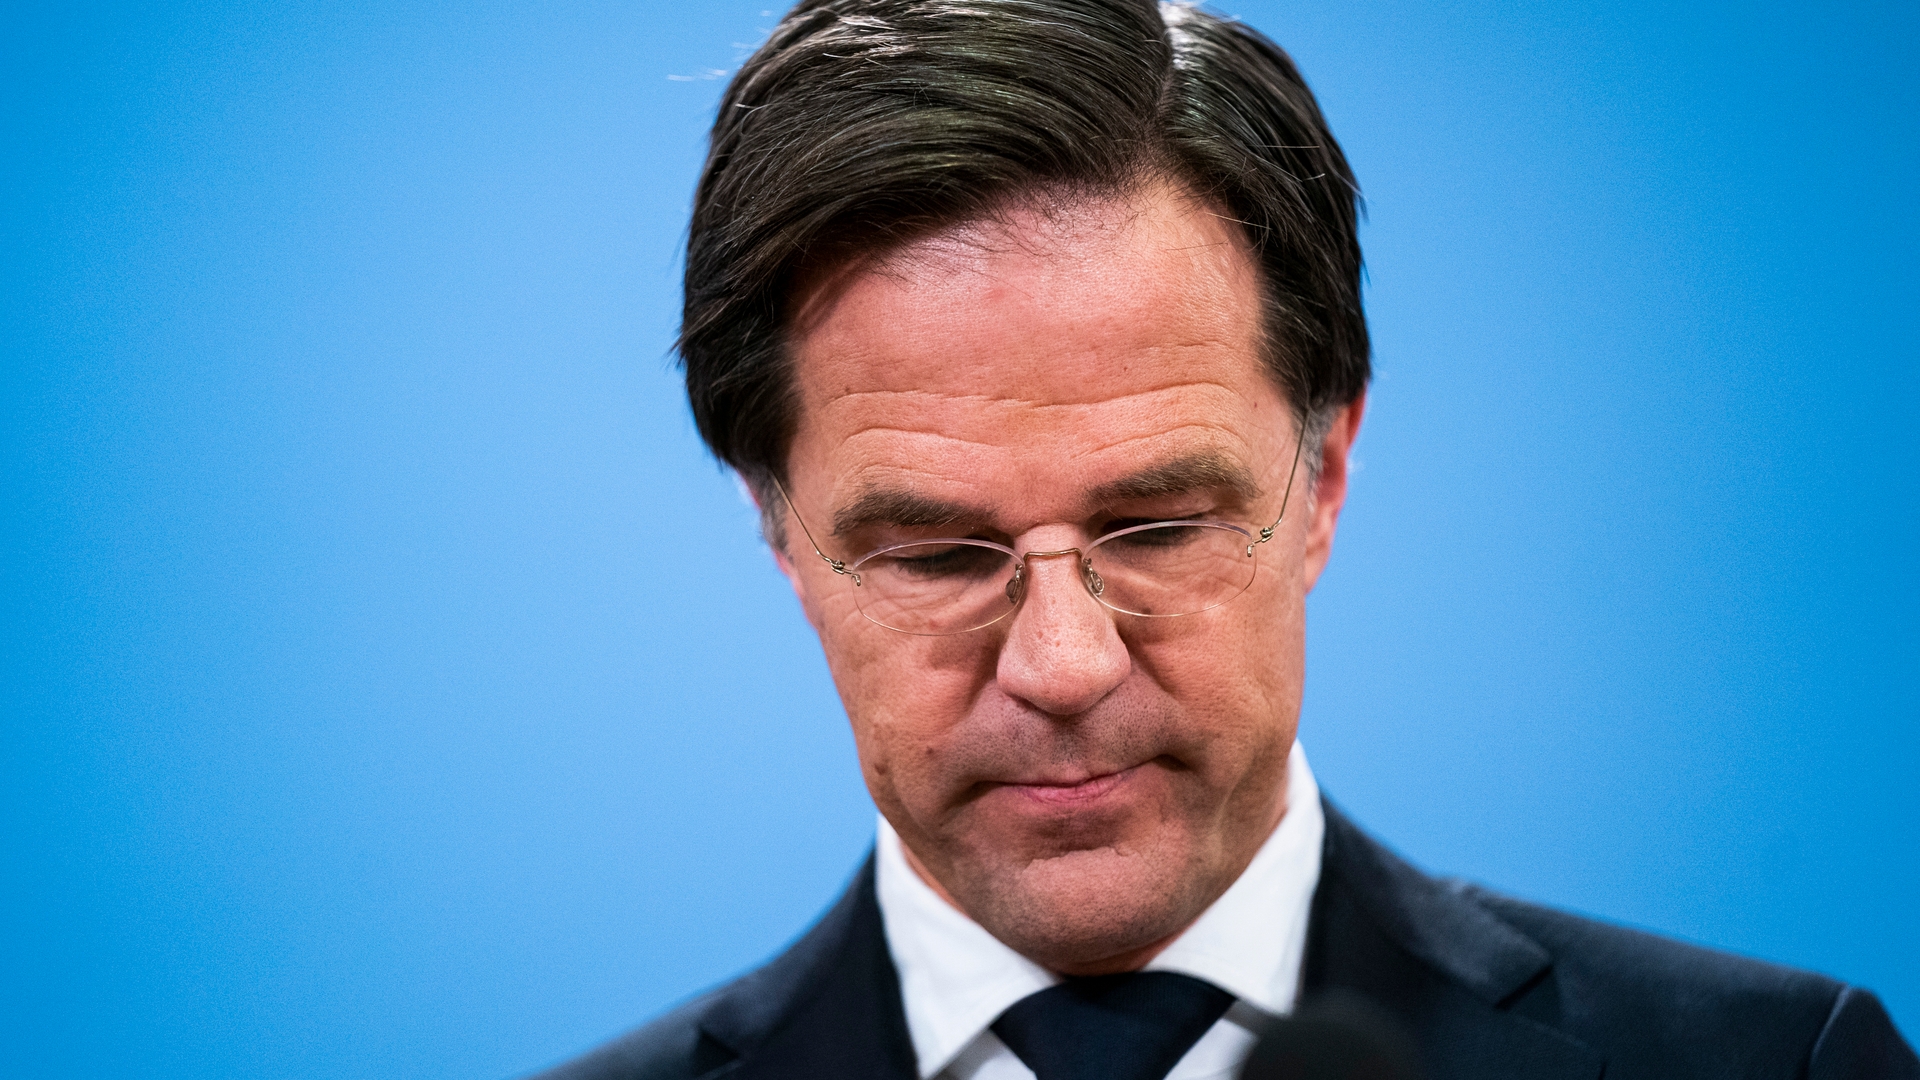 Rutte explains the resignation of the cabinet